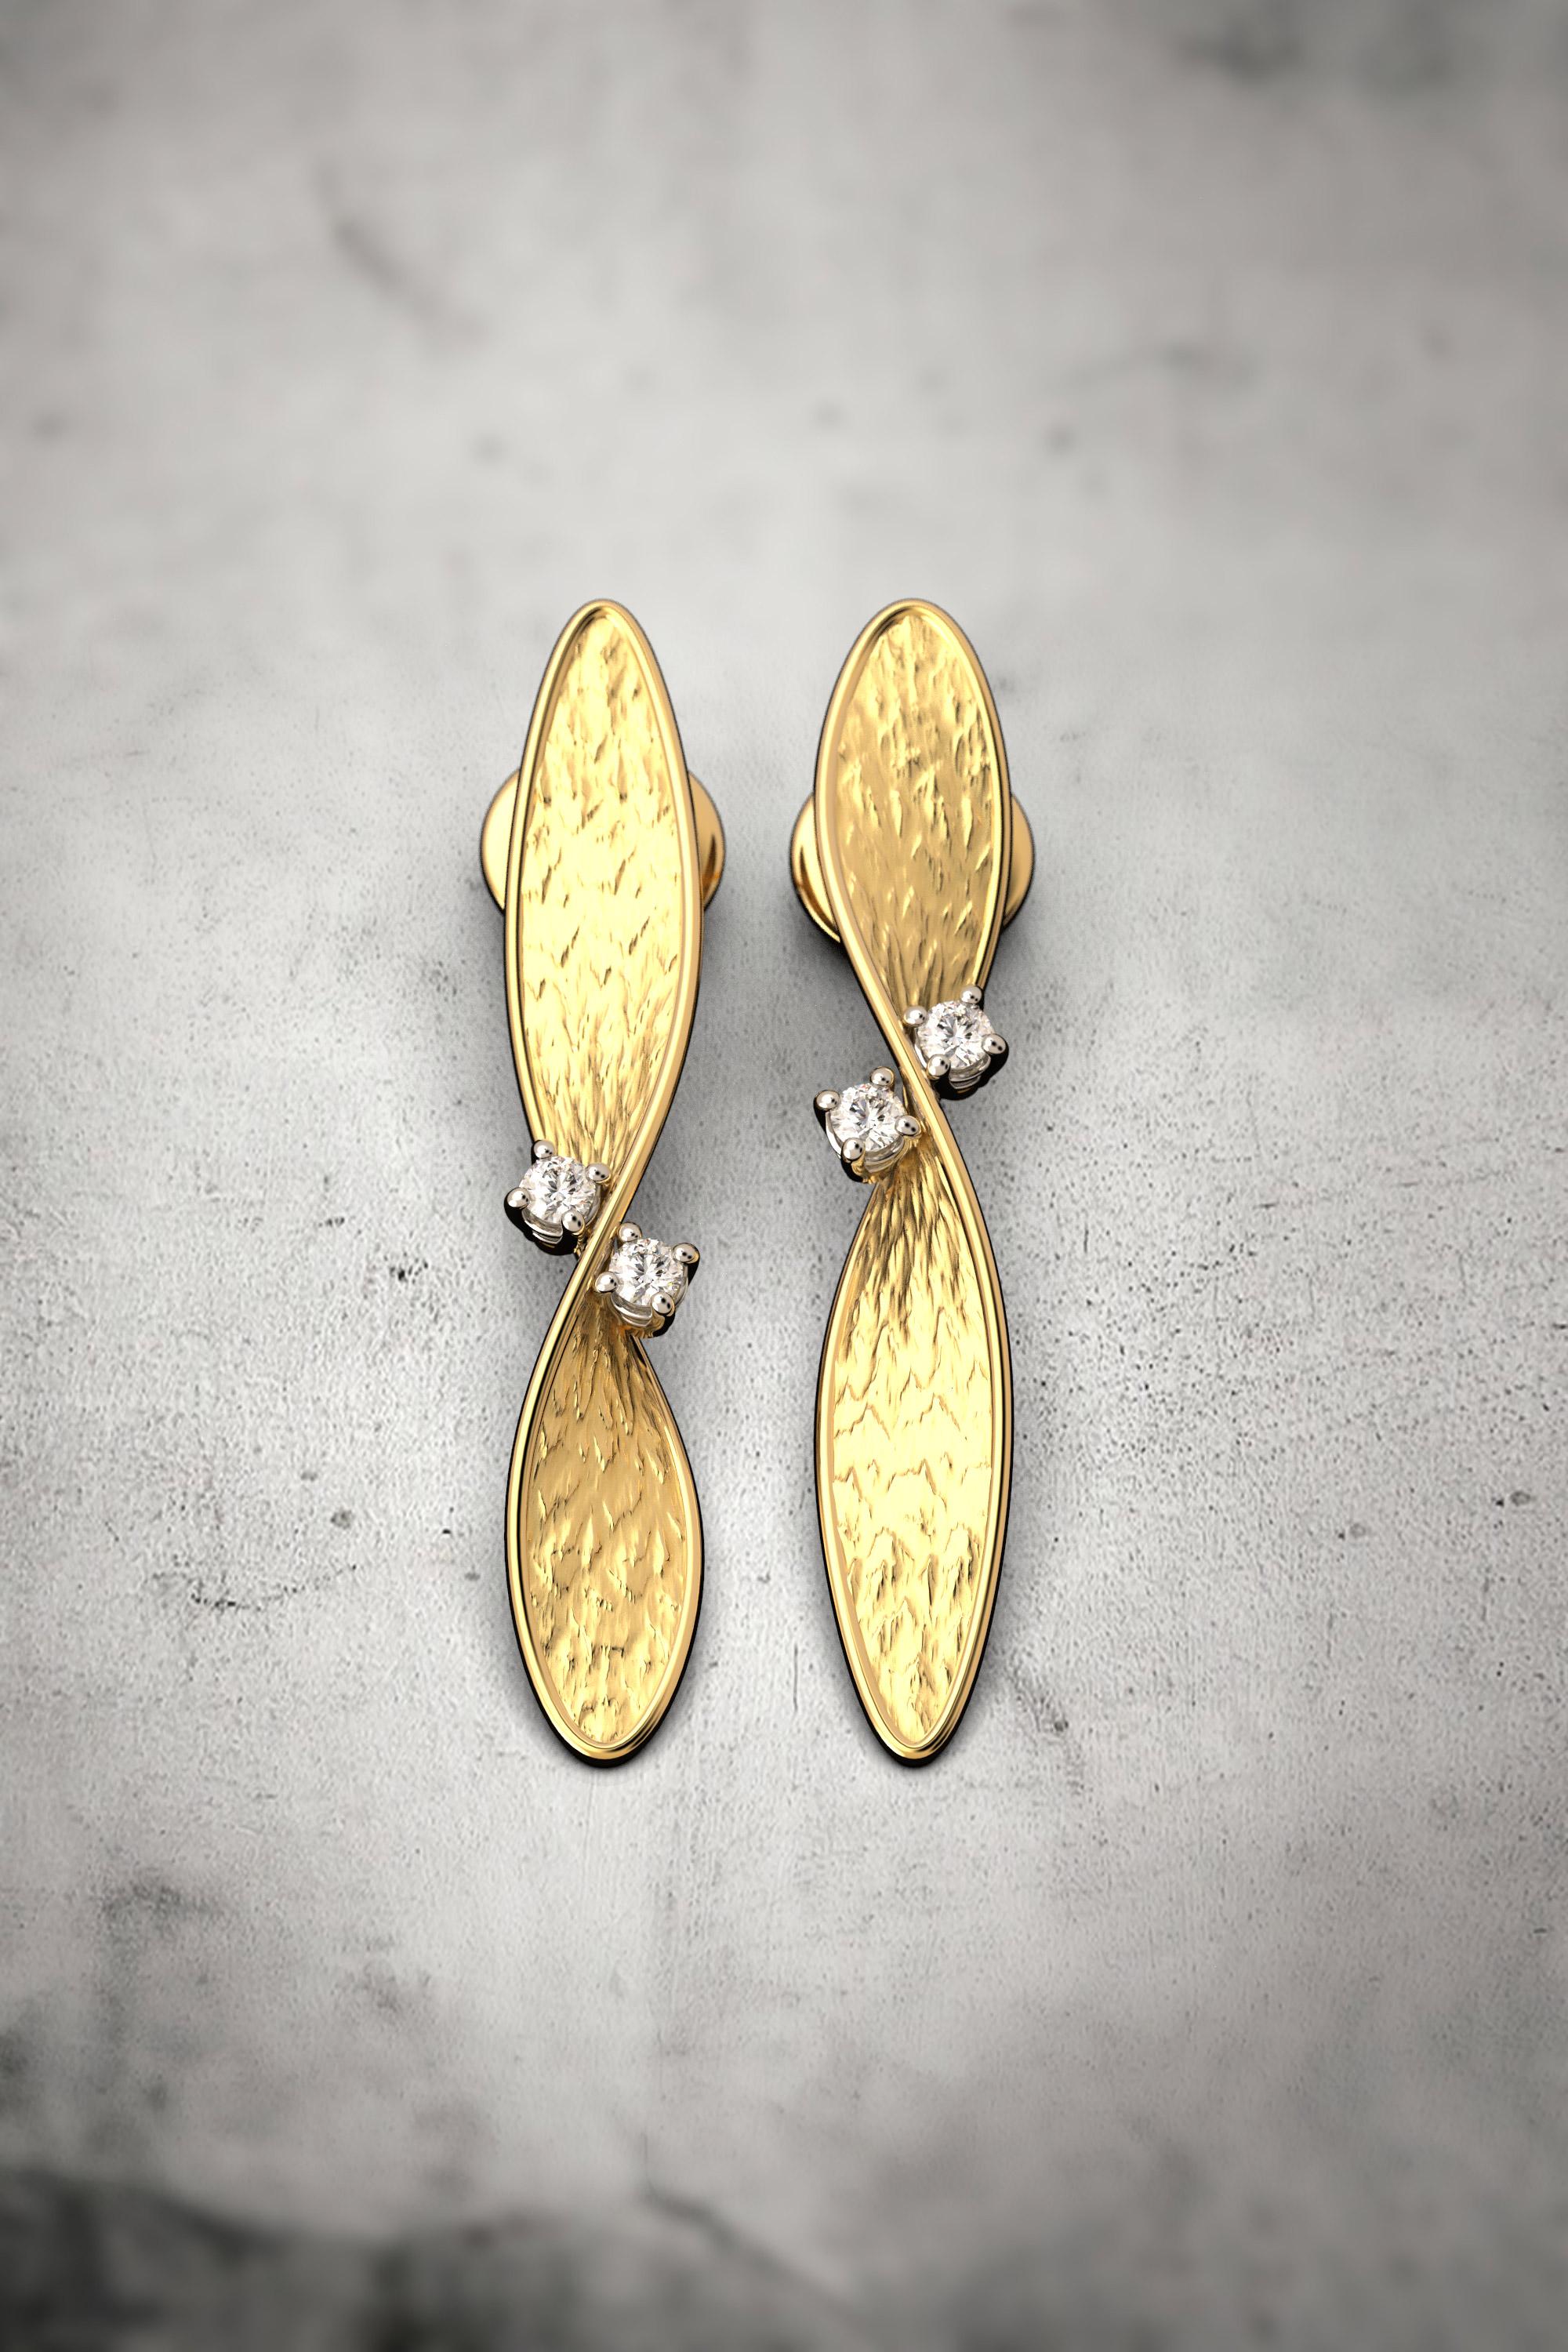 Contemporary 18k Gold Diamond Earrings made in Italy by Oltremare Gioielli, Italian Jewelry. For Sale